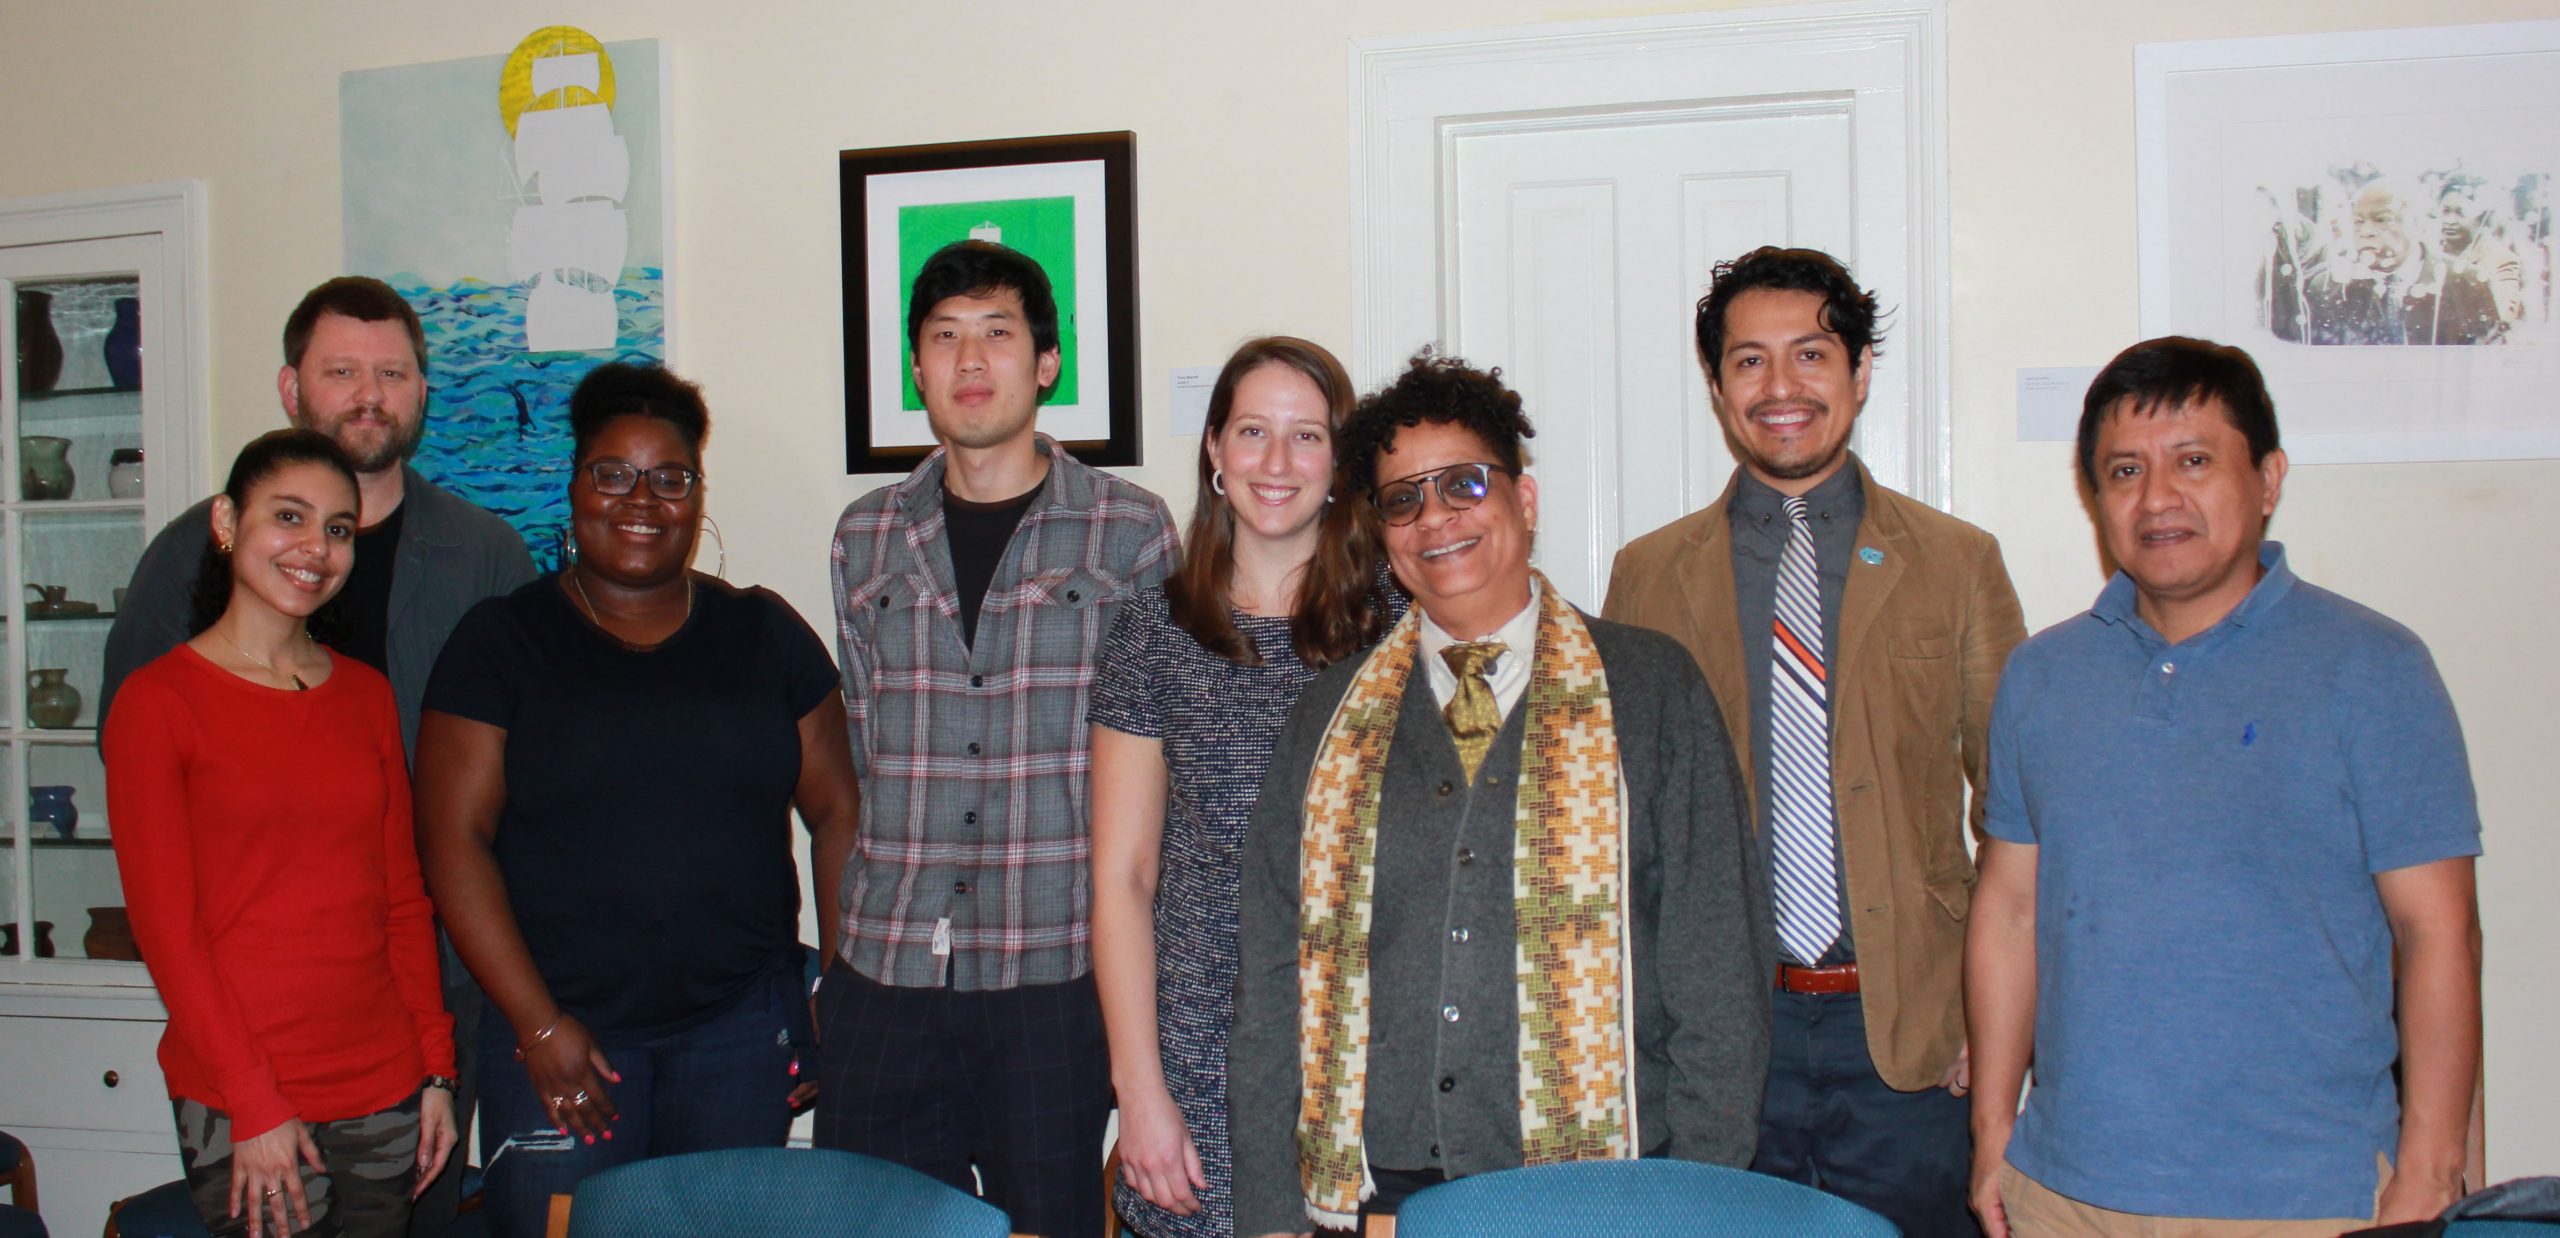 Doctoral candidates in the Graduate Working Group with Critical Ethnic Studies Director Sharon Holland.